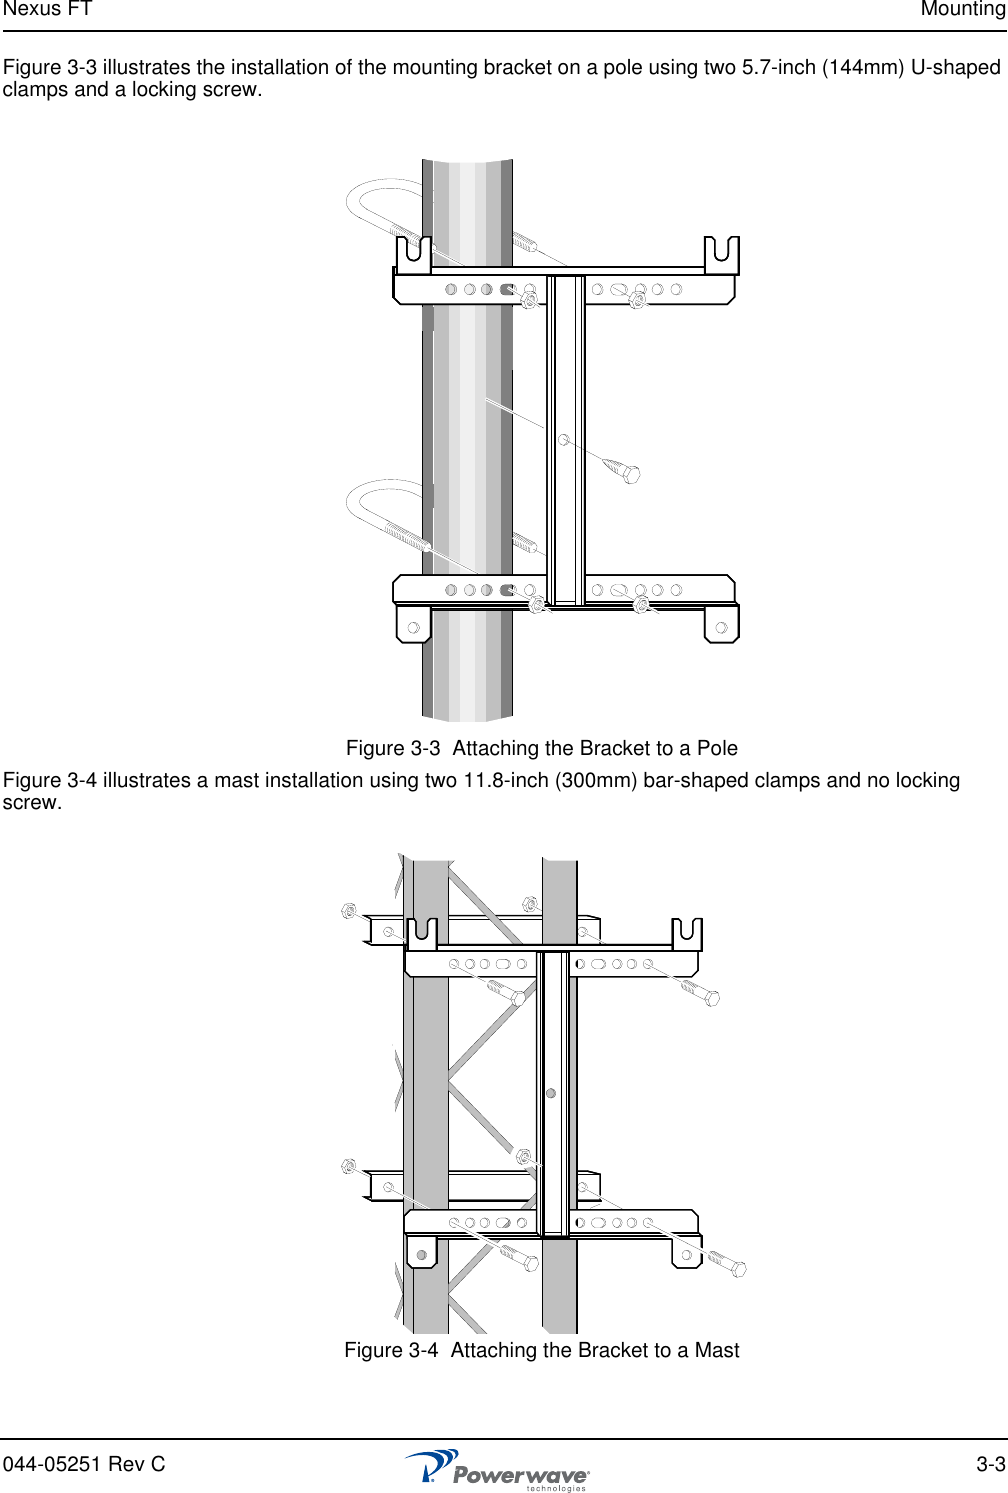 Nexus FT Mounting044-05251 Rev C 3-3Figure 3-3 illustrates the installation of the mounting bracket on a pole using two 5.7-inch (144mm) U-shaped clamps and a locking screw.Figure 3-3  Attaching the Bracket to a PoleFigure 3-4 illustrates a mast installation using two 11.8-inch (300mm) bar-shaped clamps and no locking screw.Figure 3-4  Attaching the Bracket to a Mast